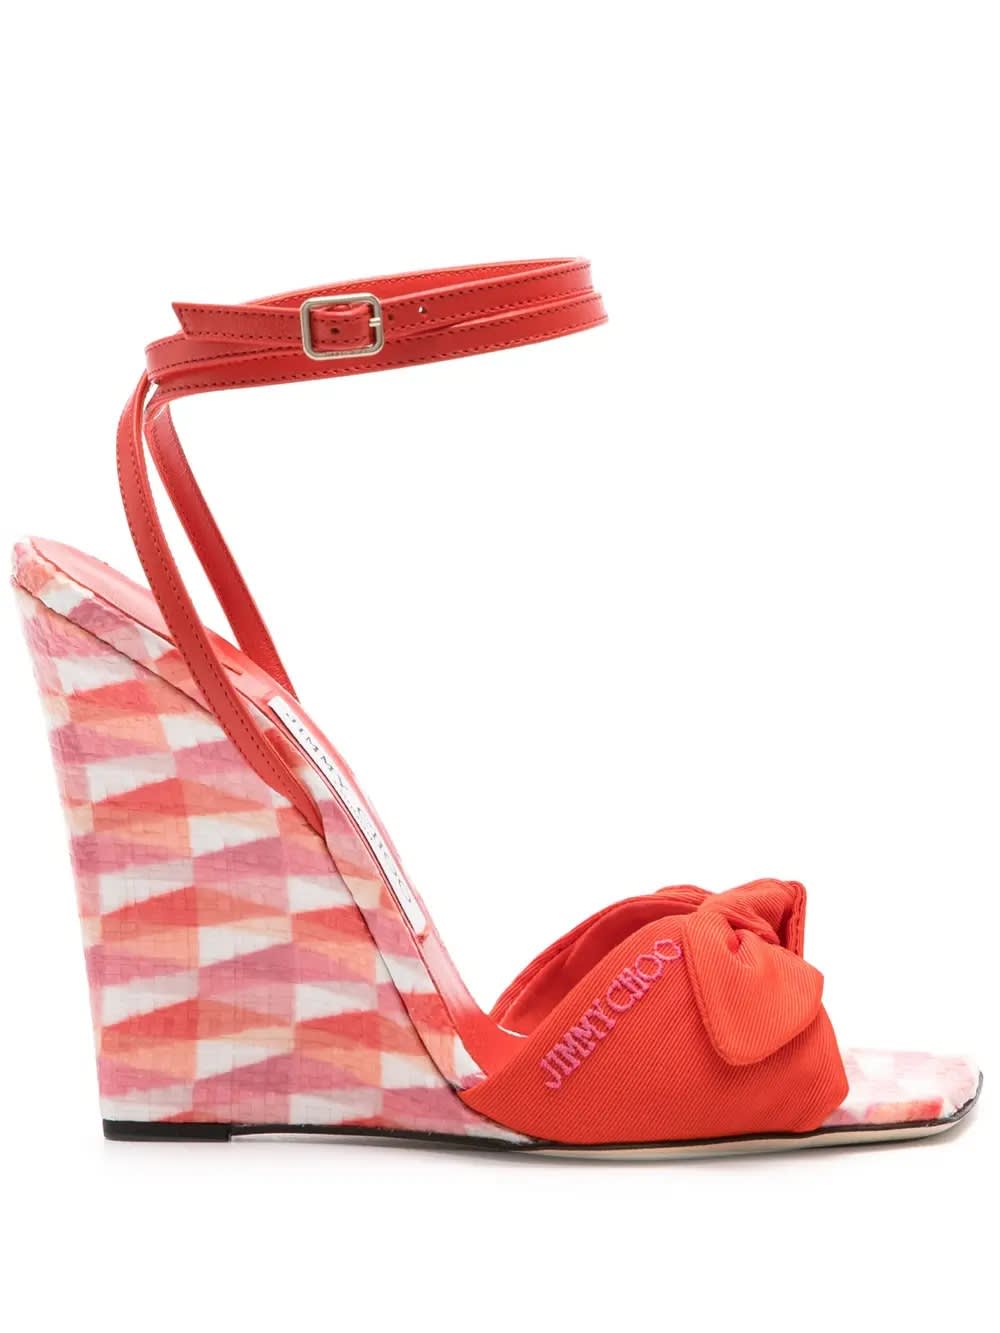 Richelle 110 Sandals In Red Canvas